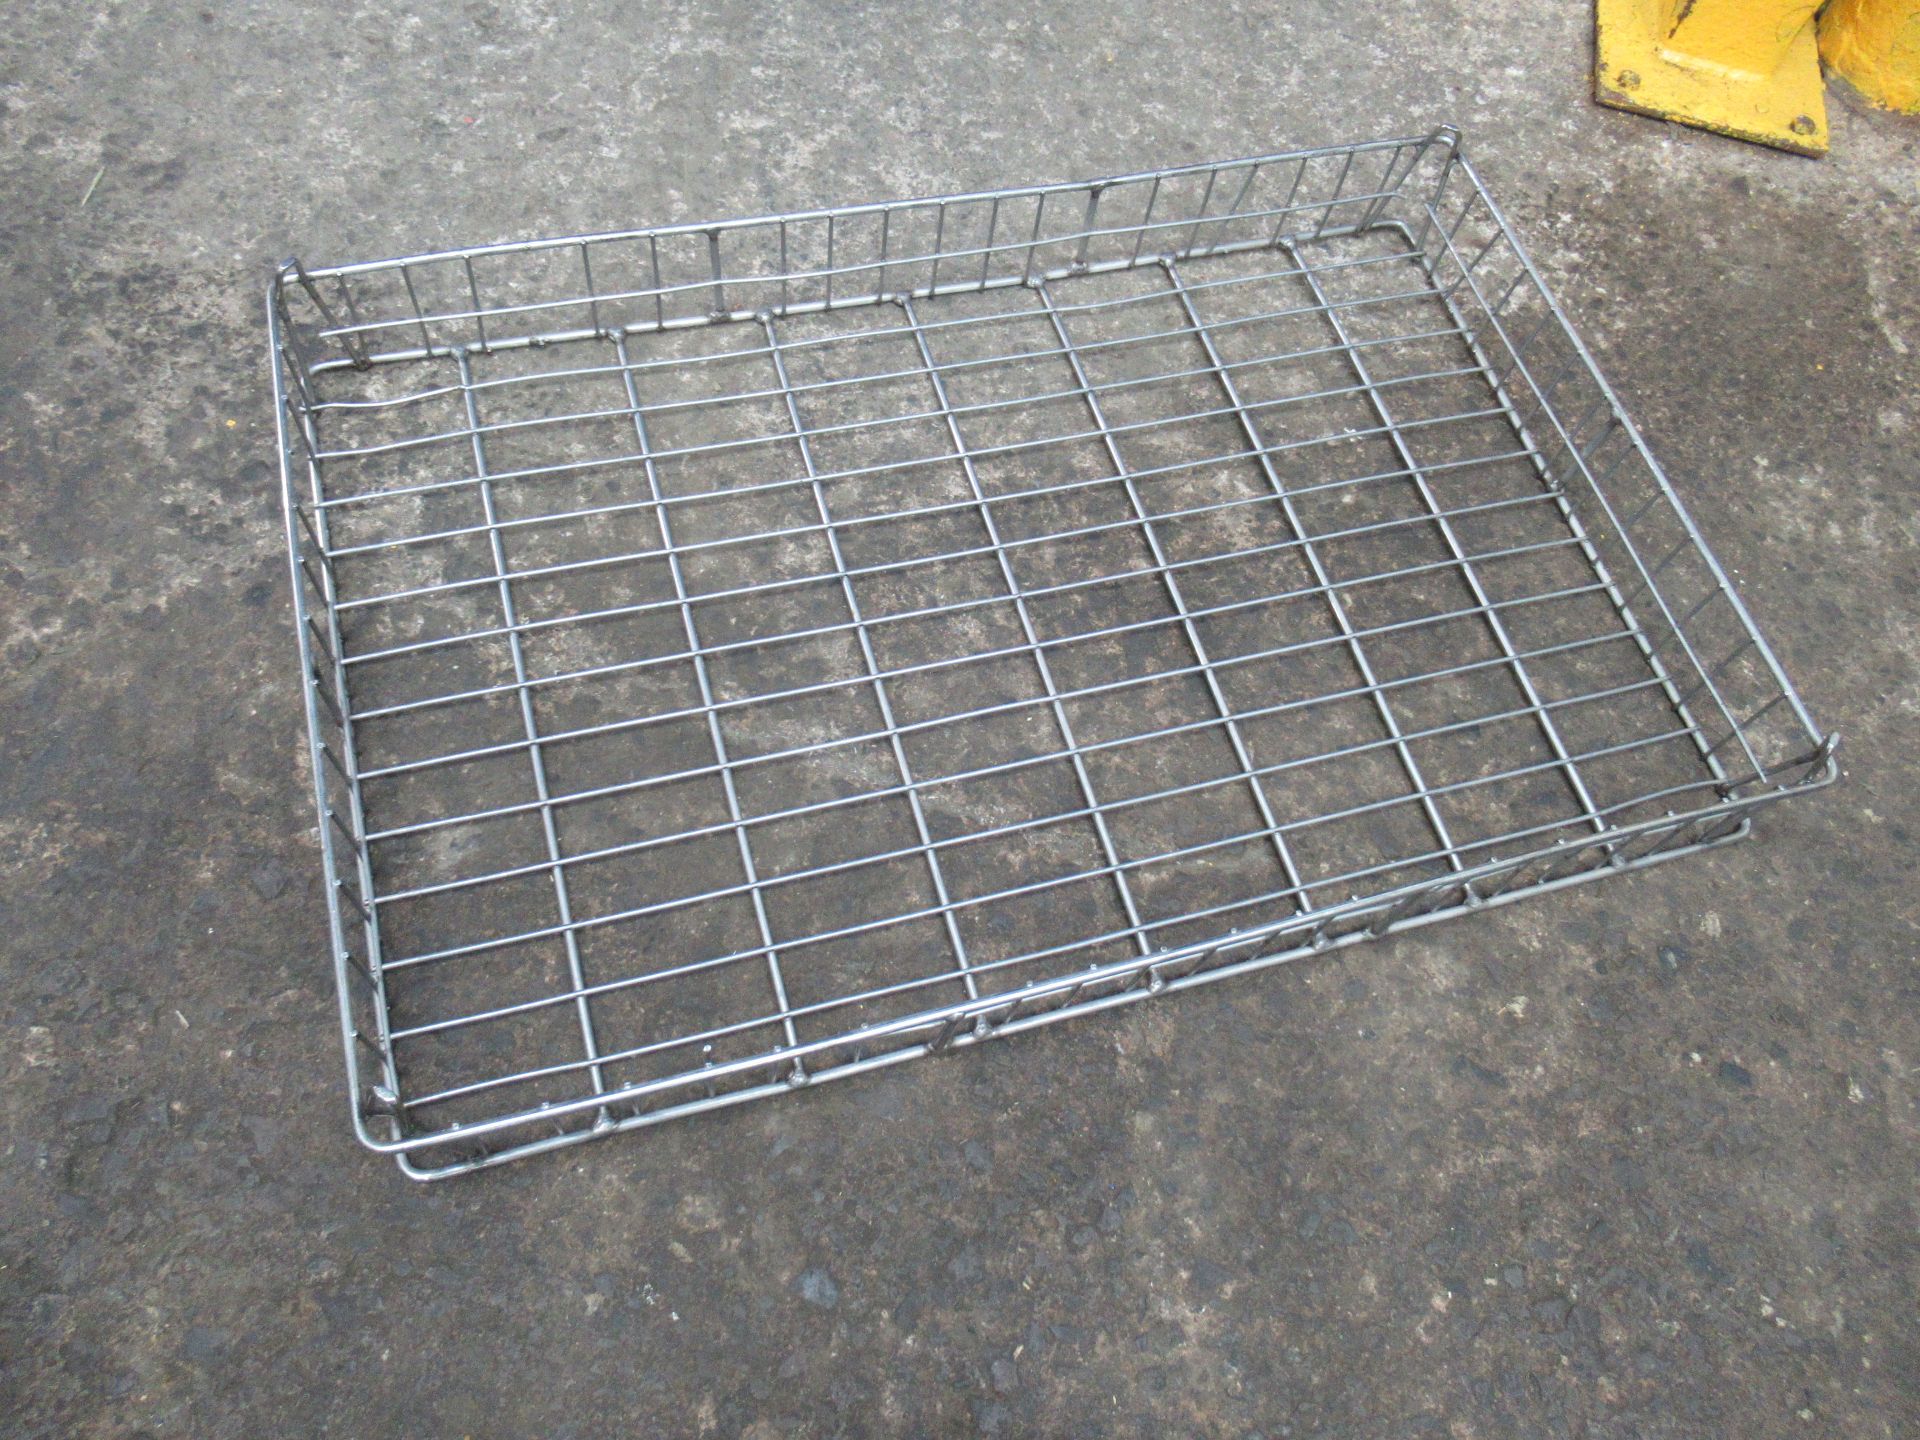 420 Stainless steel wire mesh stacking baskets, 800 x 520 x 75mm high, with 30 dollies - Image 3 of 4